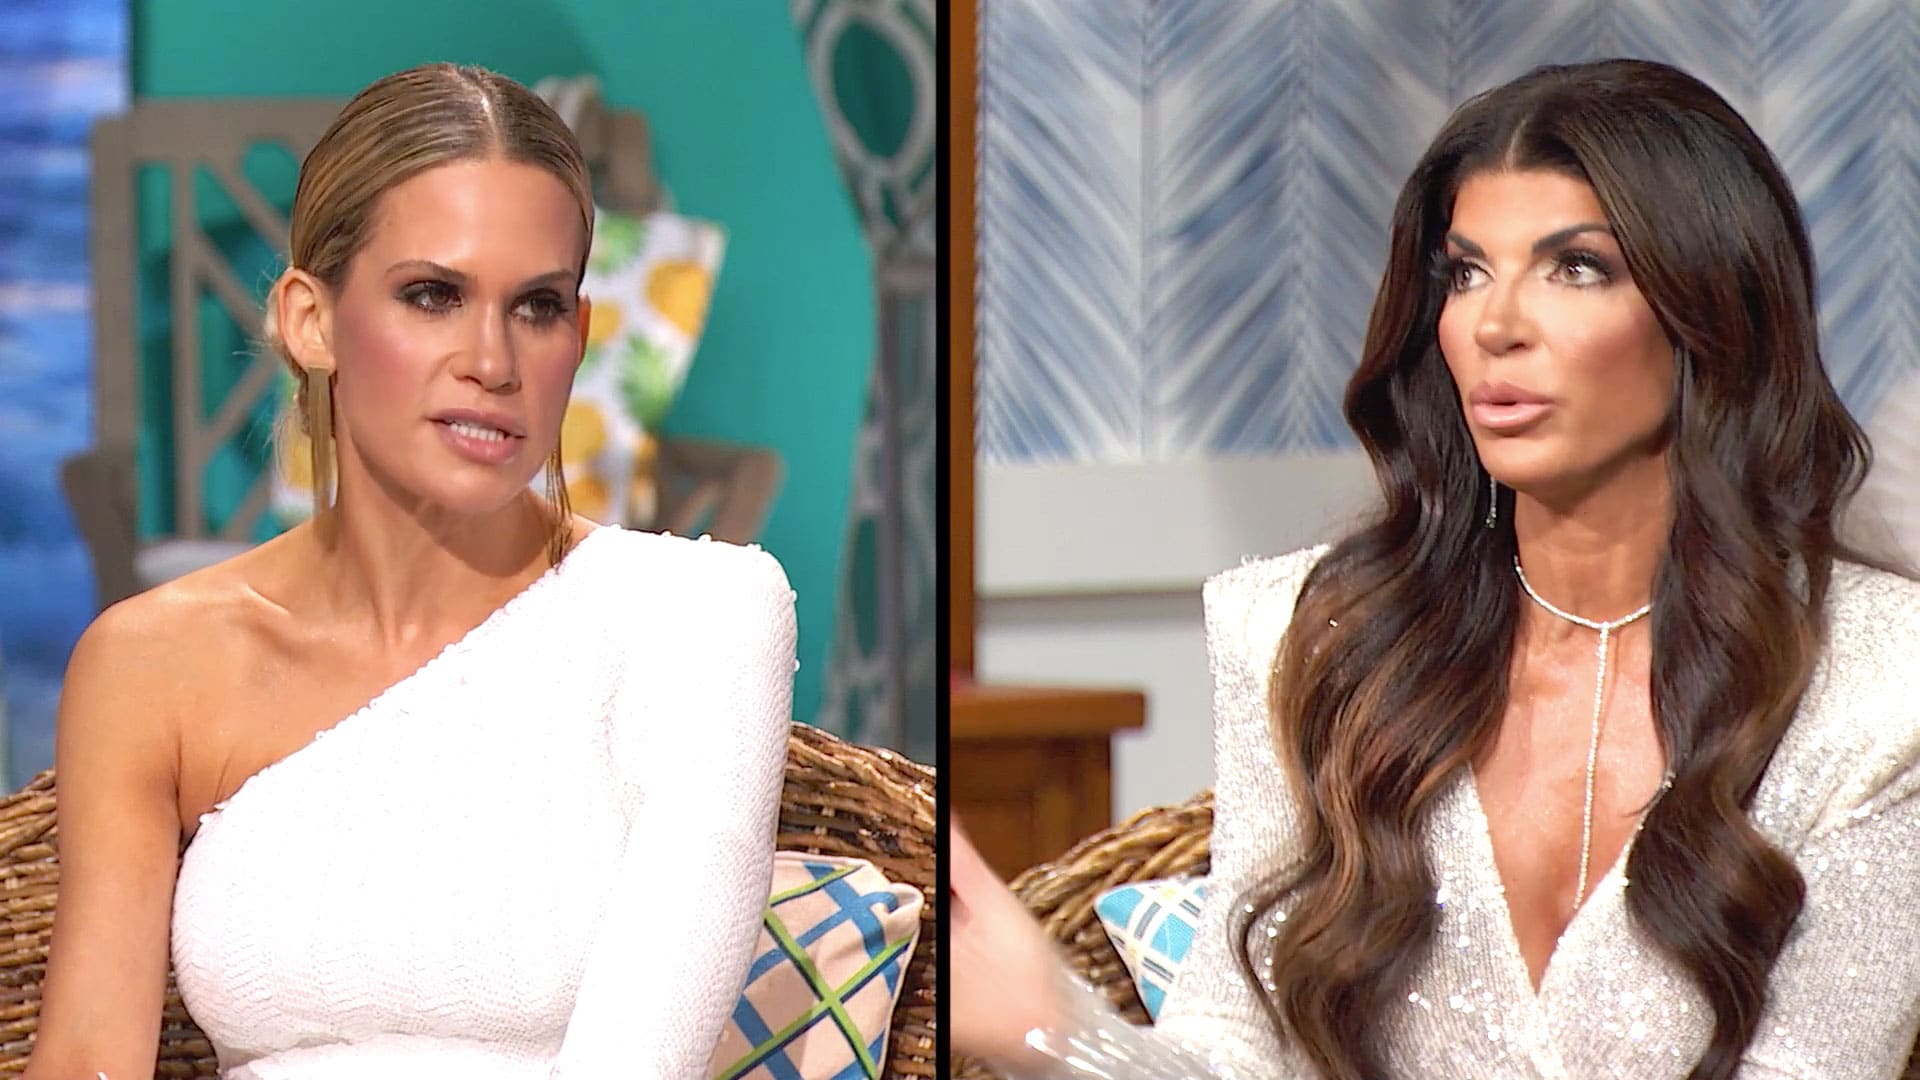 Jackie and Teresa&#8217;s Newfound Friendship Surprises Real Housewives Fans